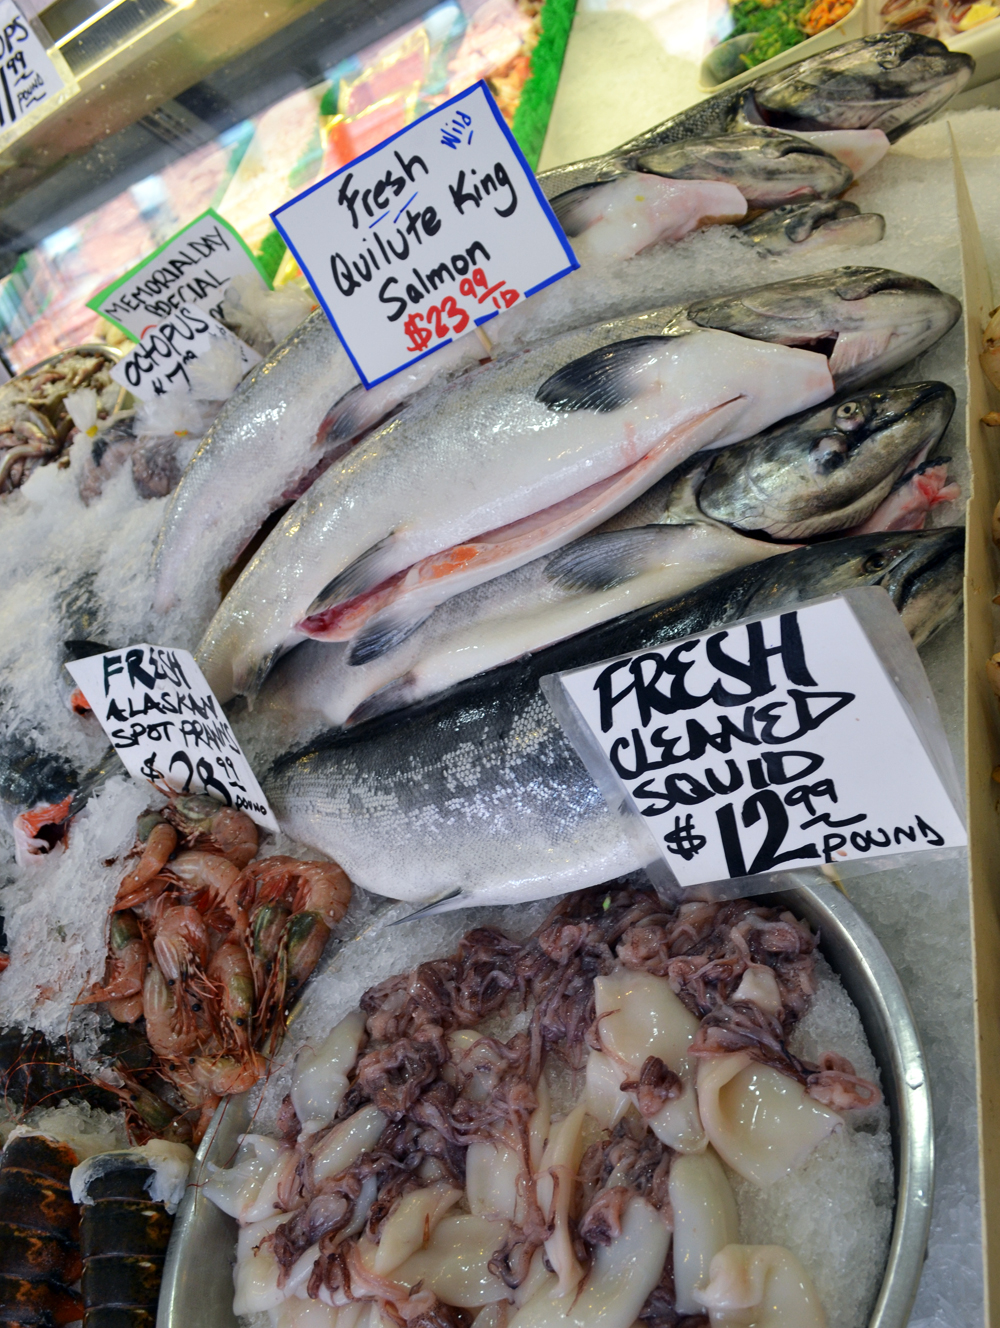 fish are shown in the front window of a market